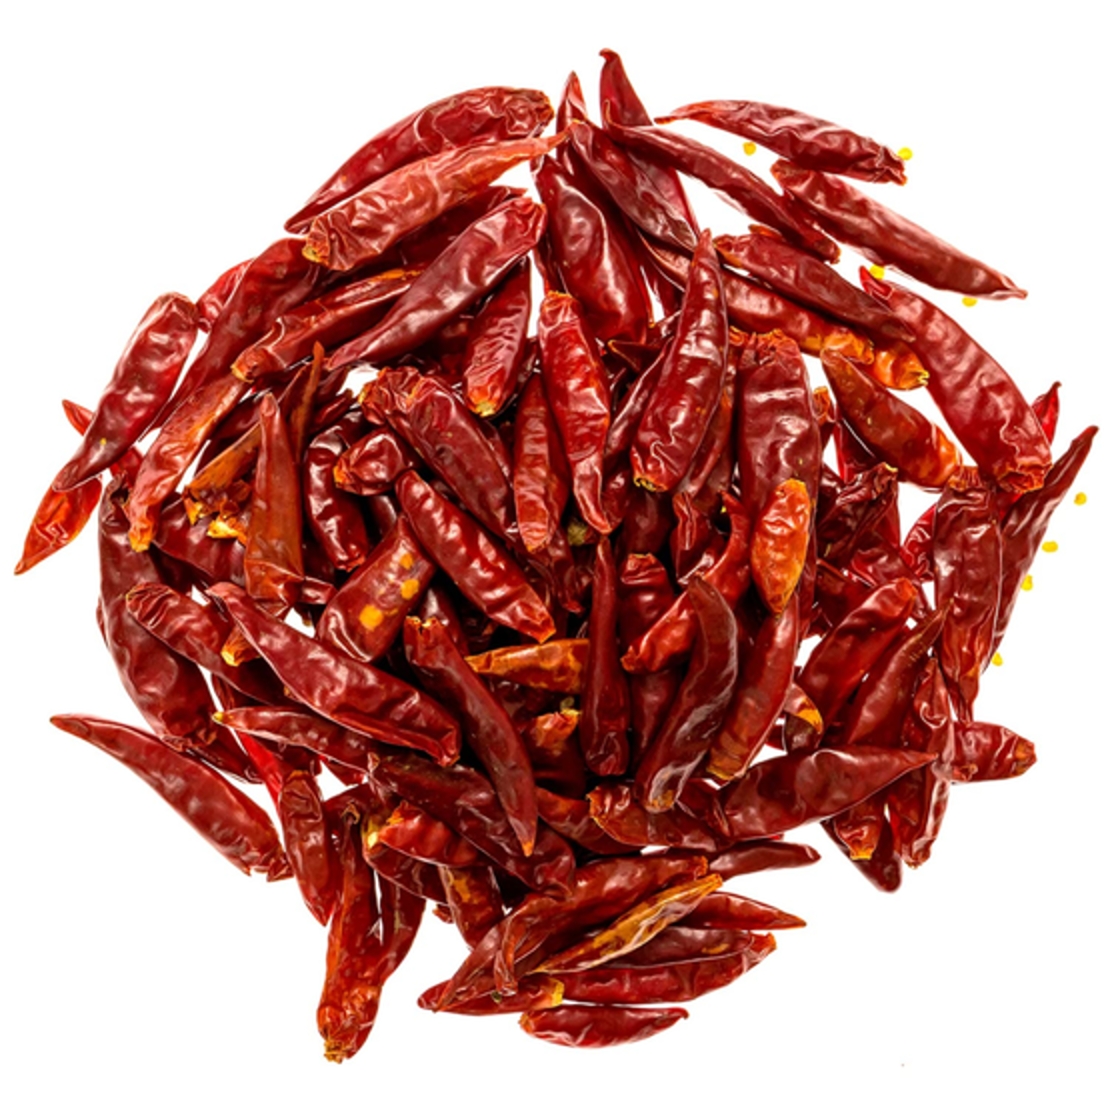 Dried Whole Chili Pack 180 g